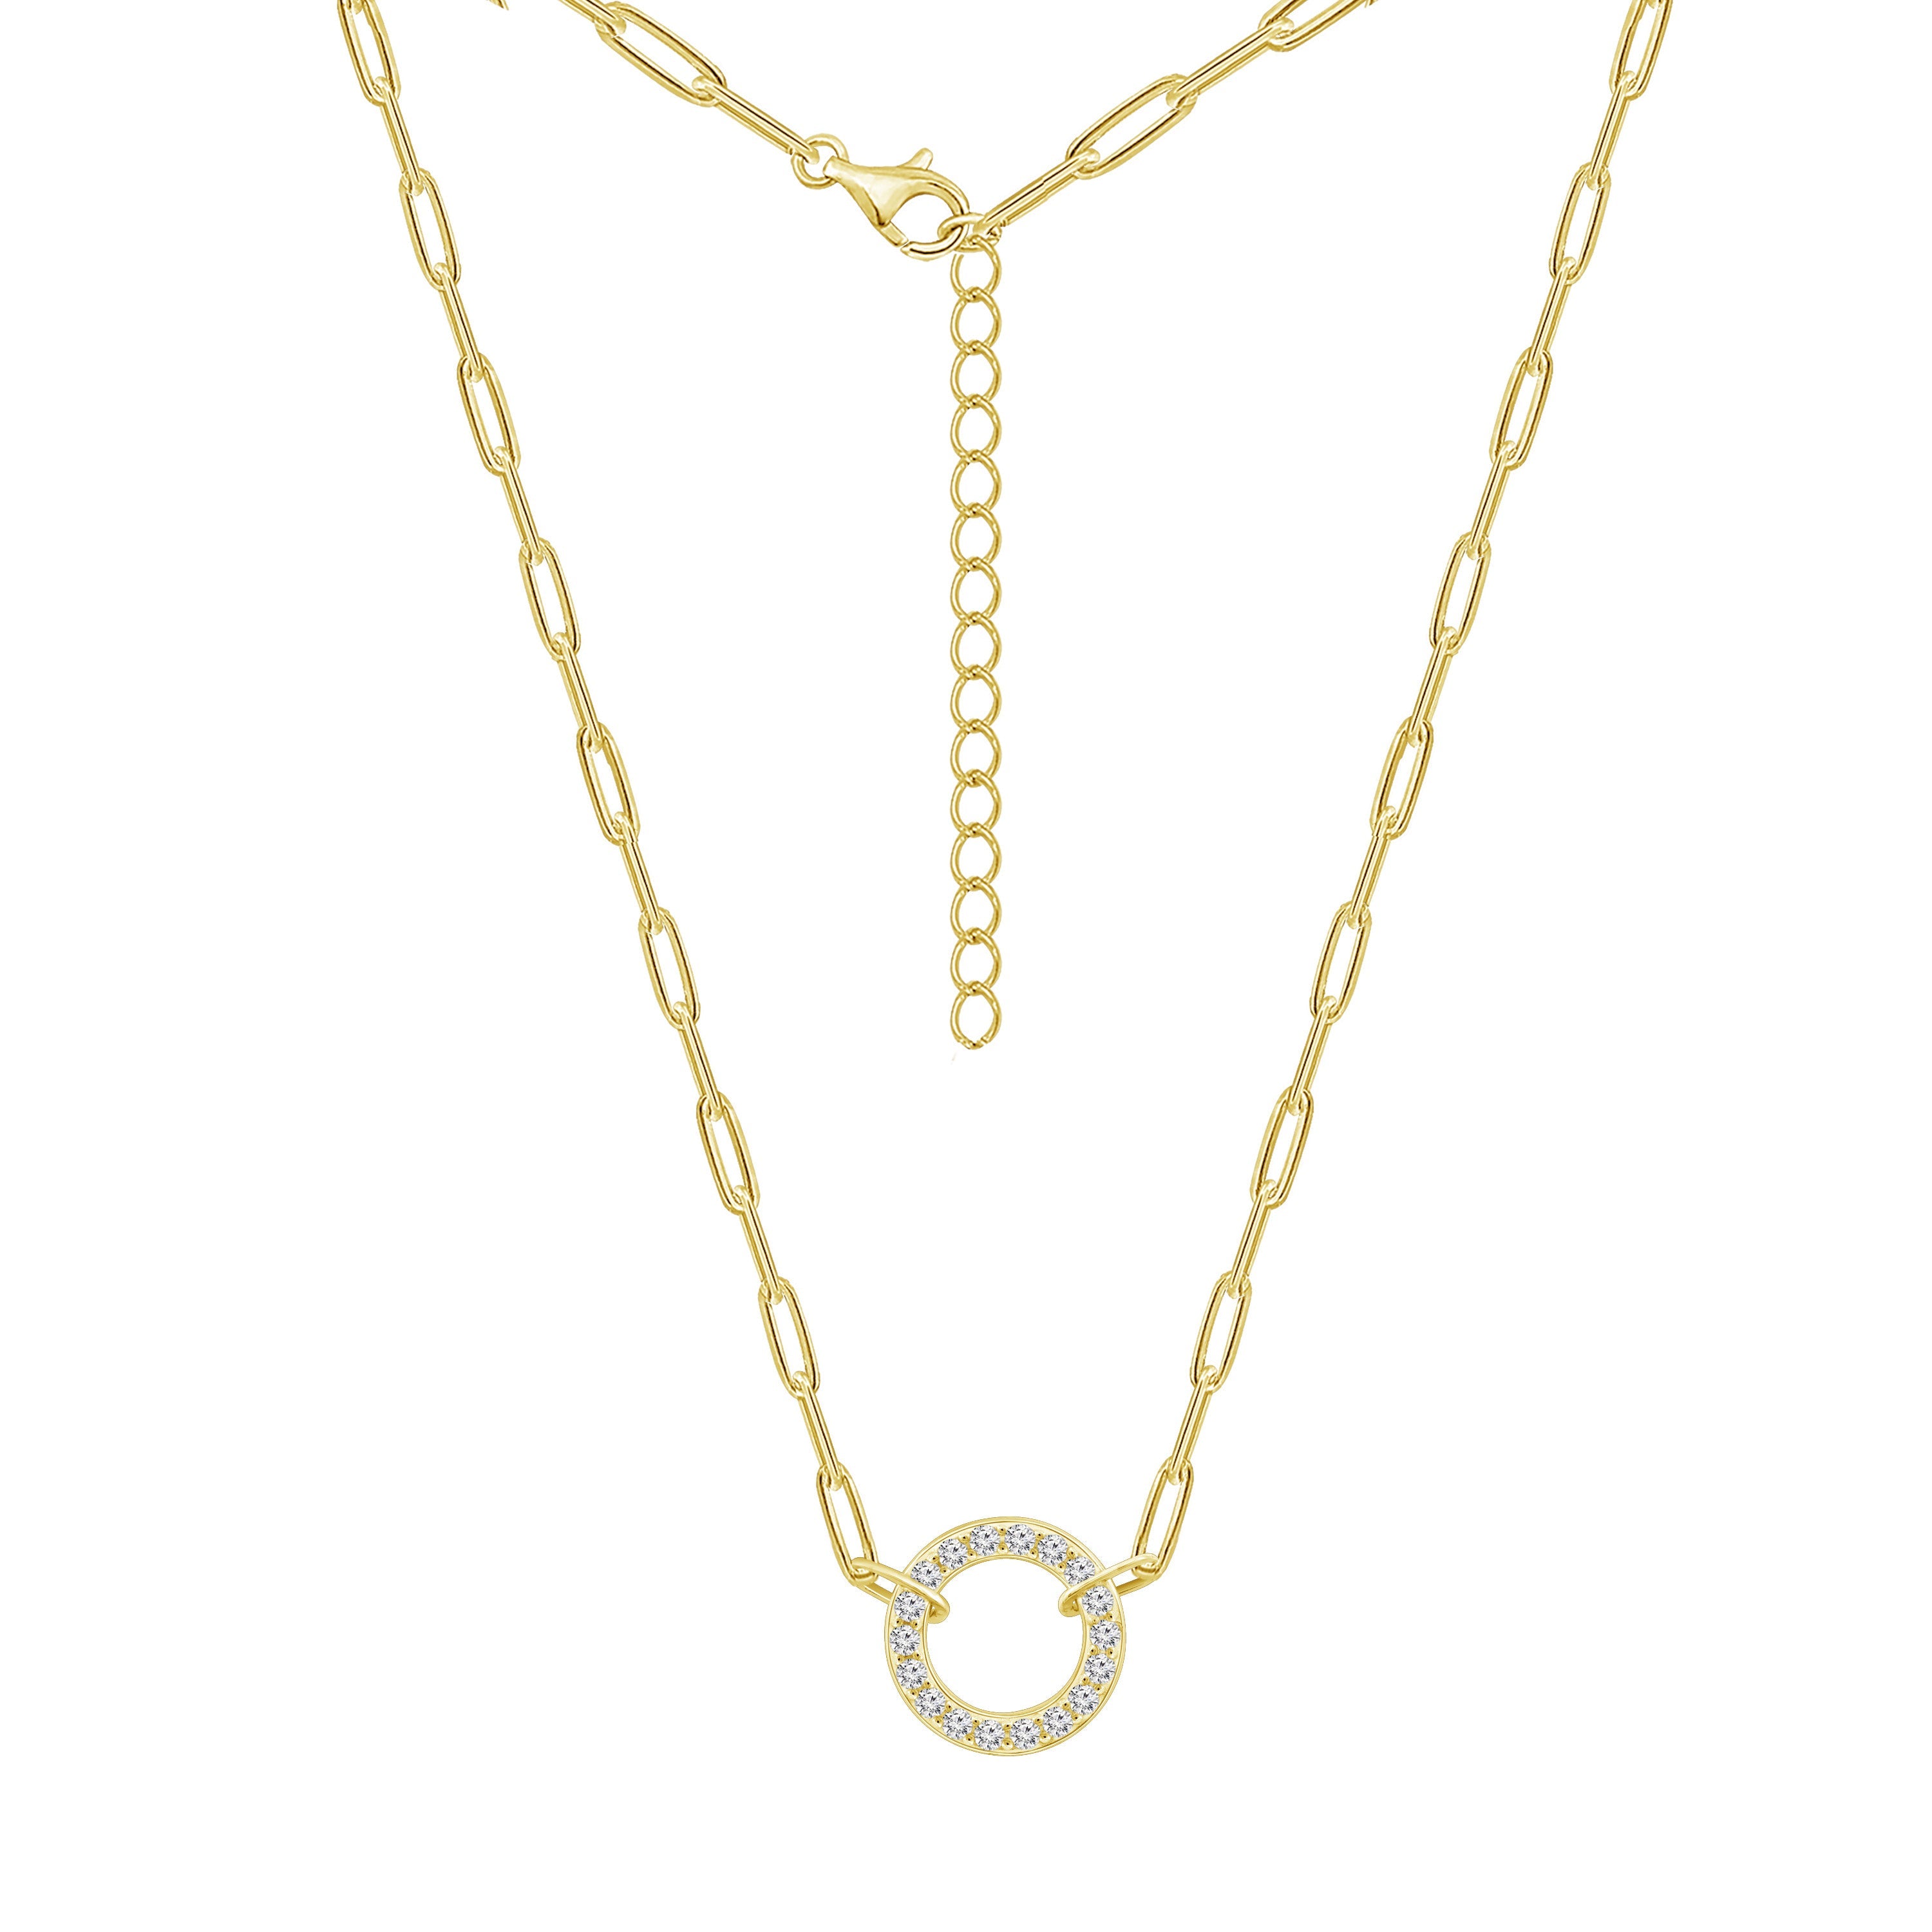 Triple Paper Clip Chain Necklace - Yellow Gold – Golden Tangerine